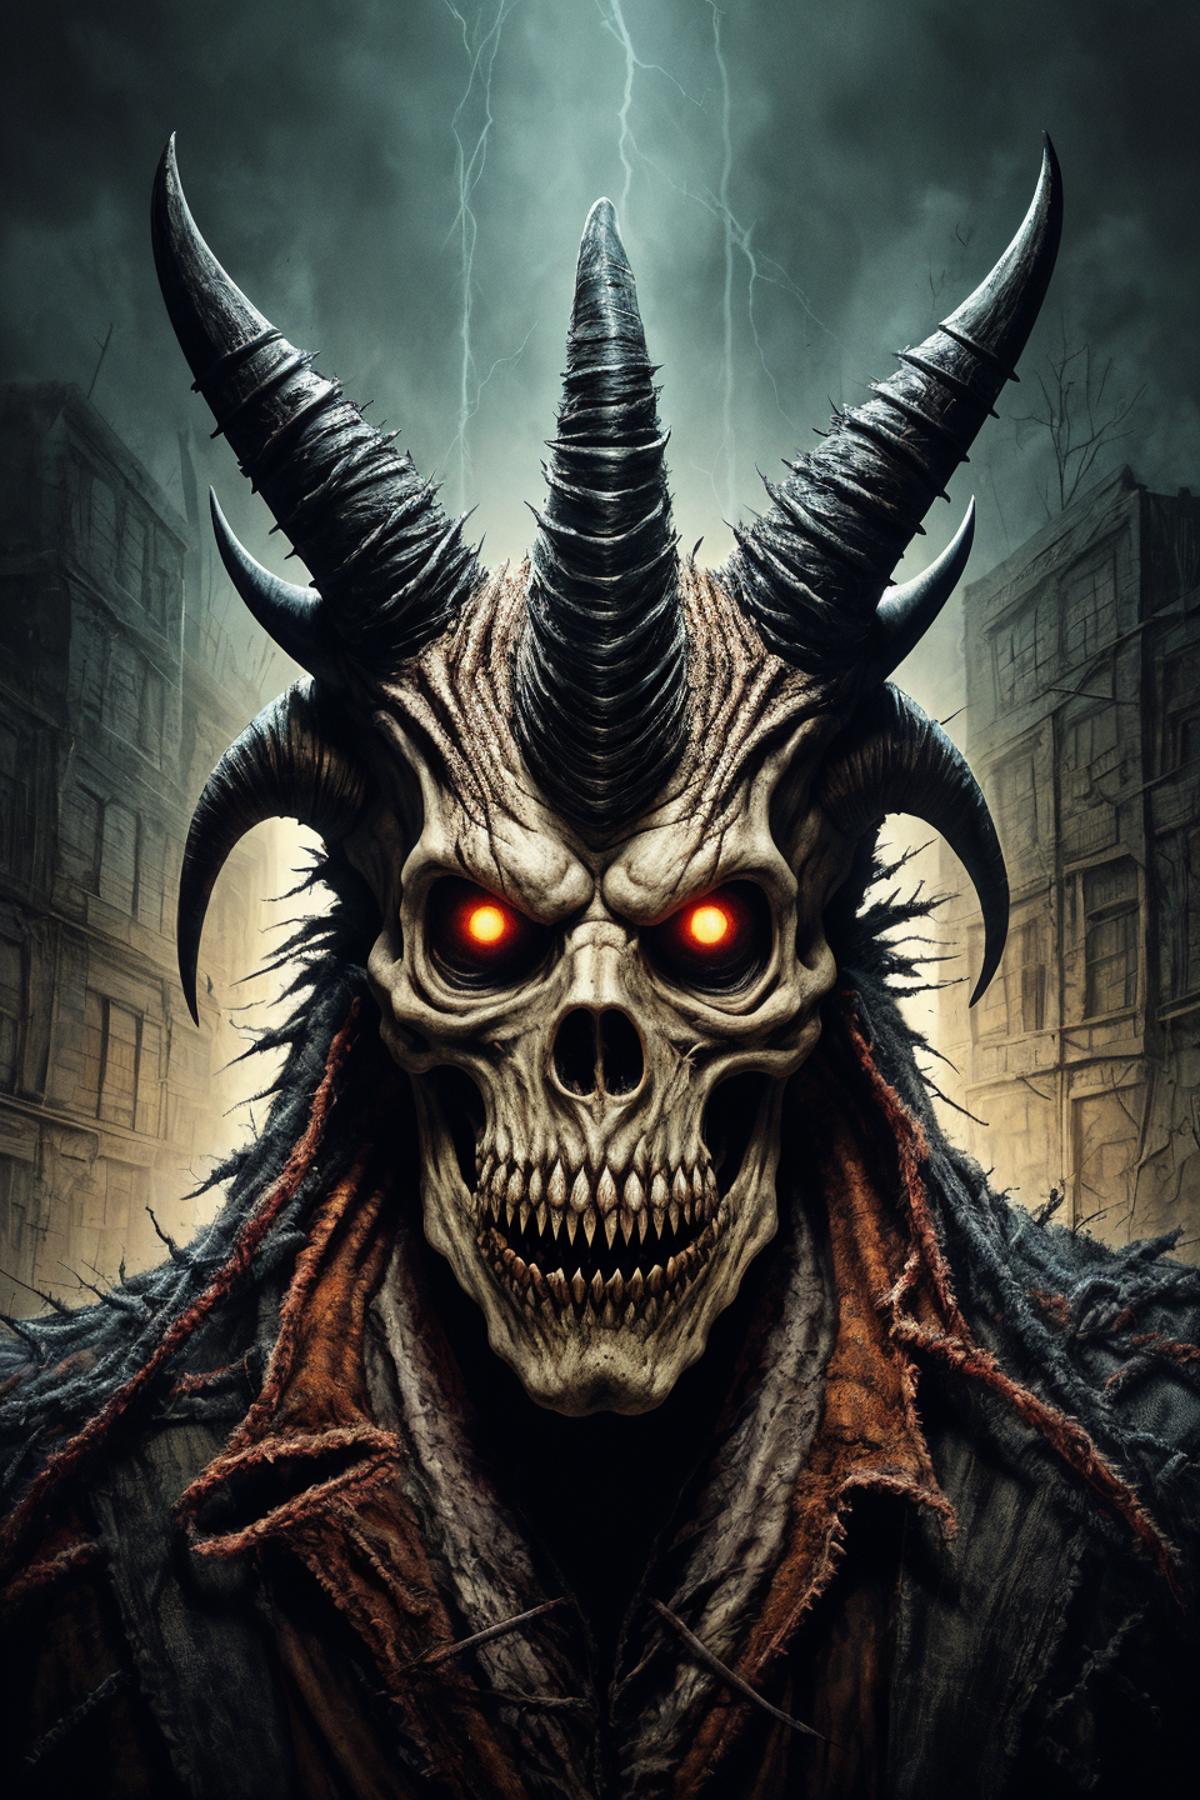 A demonic skull with horns and glowing eyes in front of a cityscape.